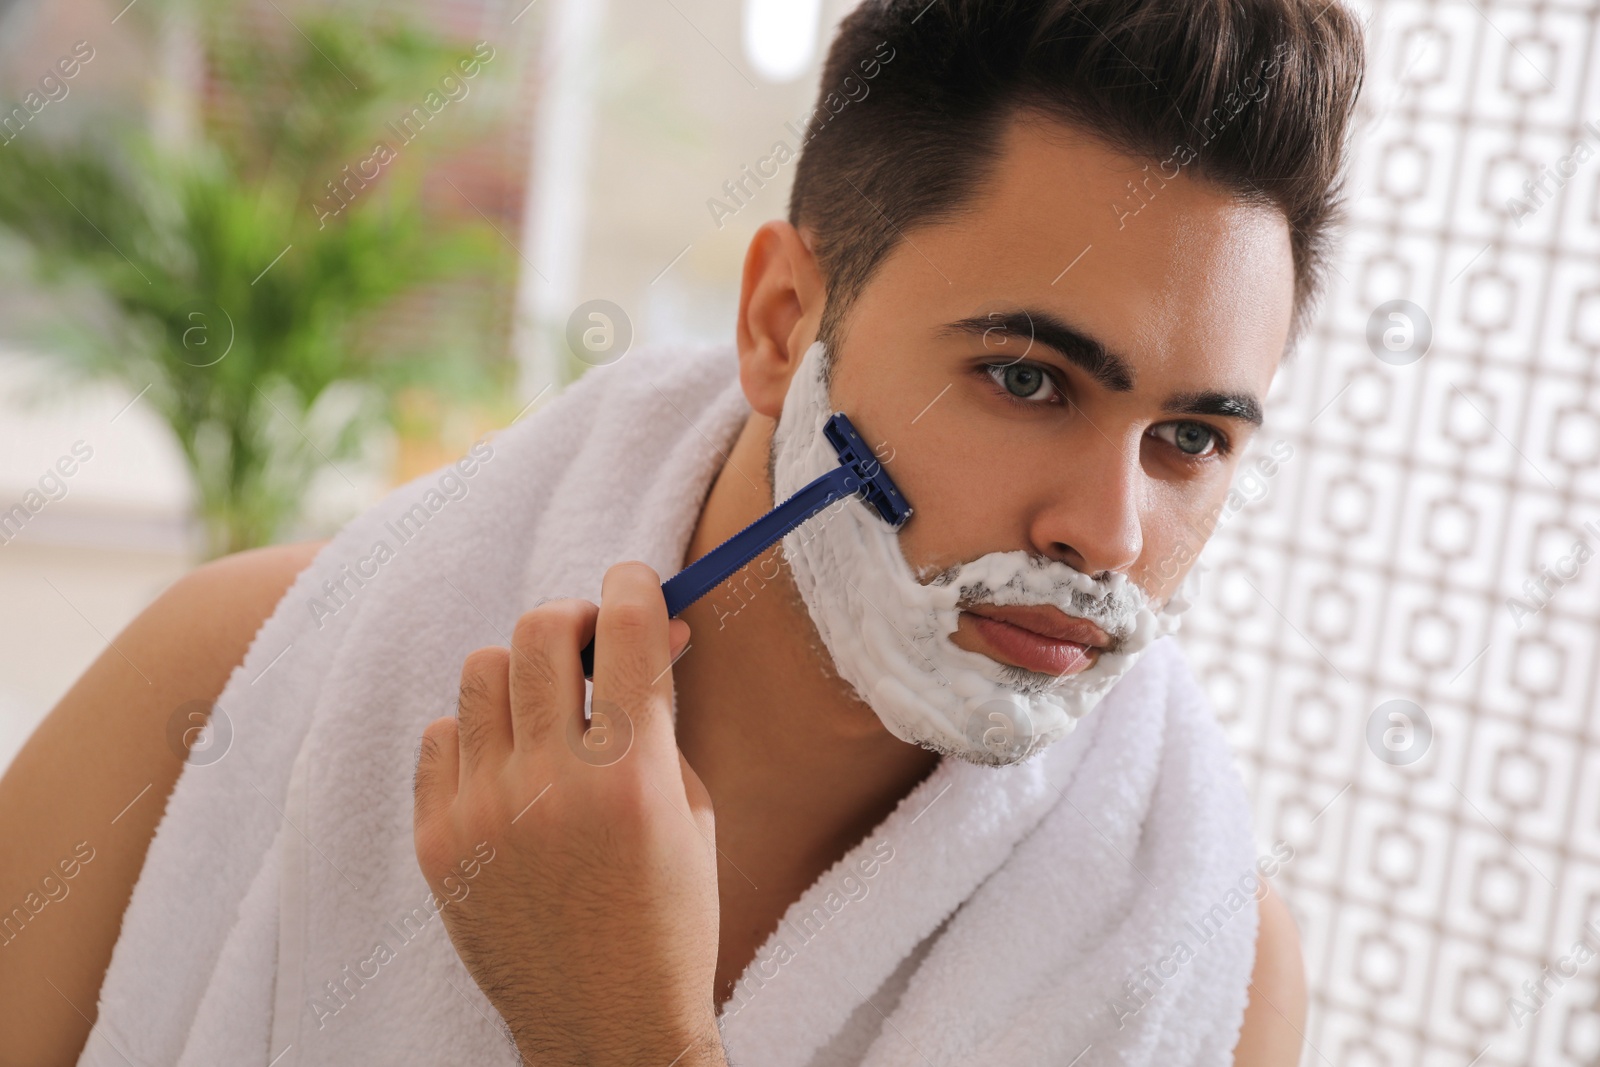 Photo of Handsome young man shaving with razor in bathroom